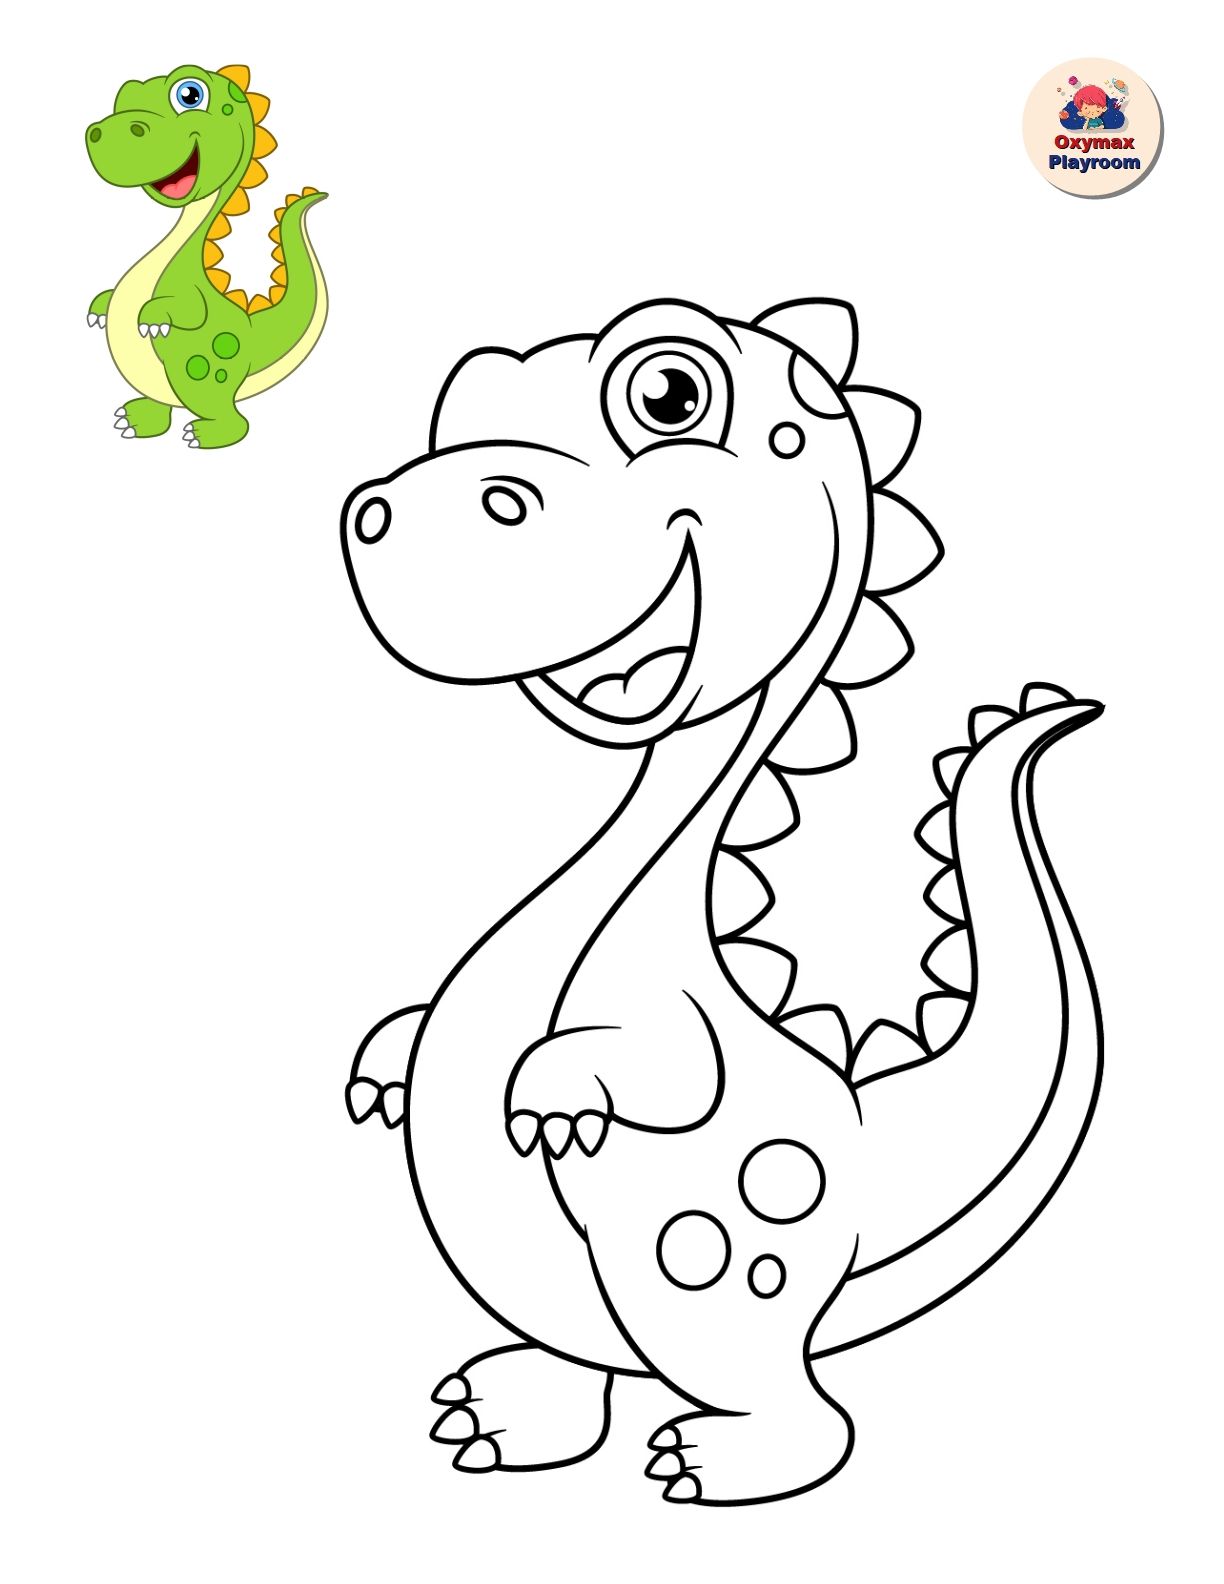 Coloring pages for children "Dinosaurs"